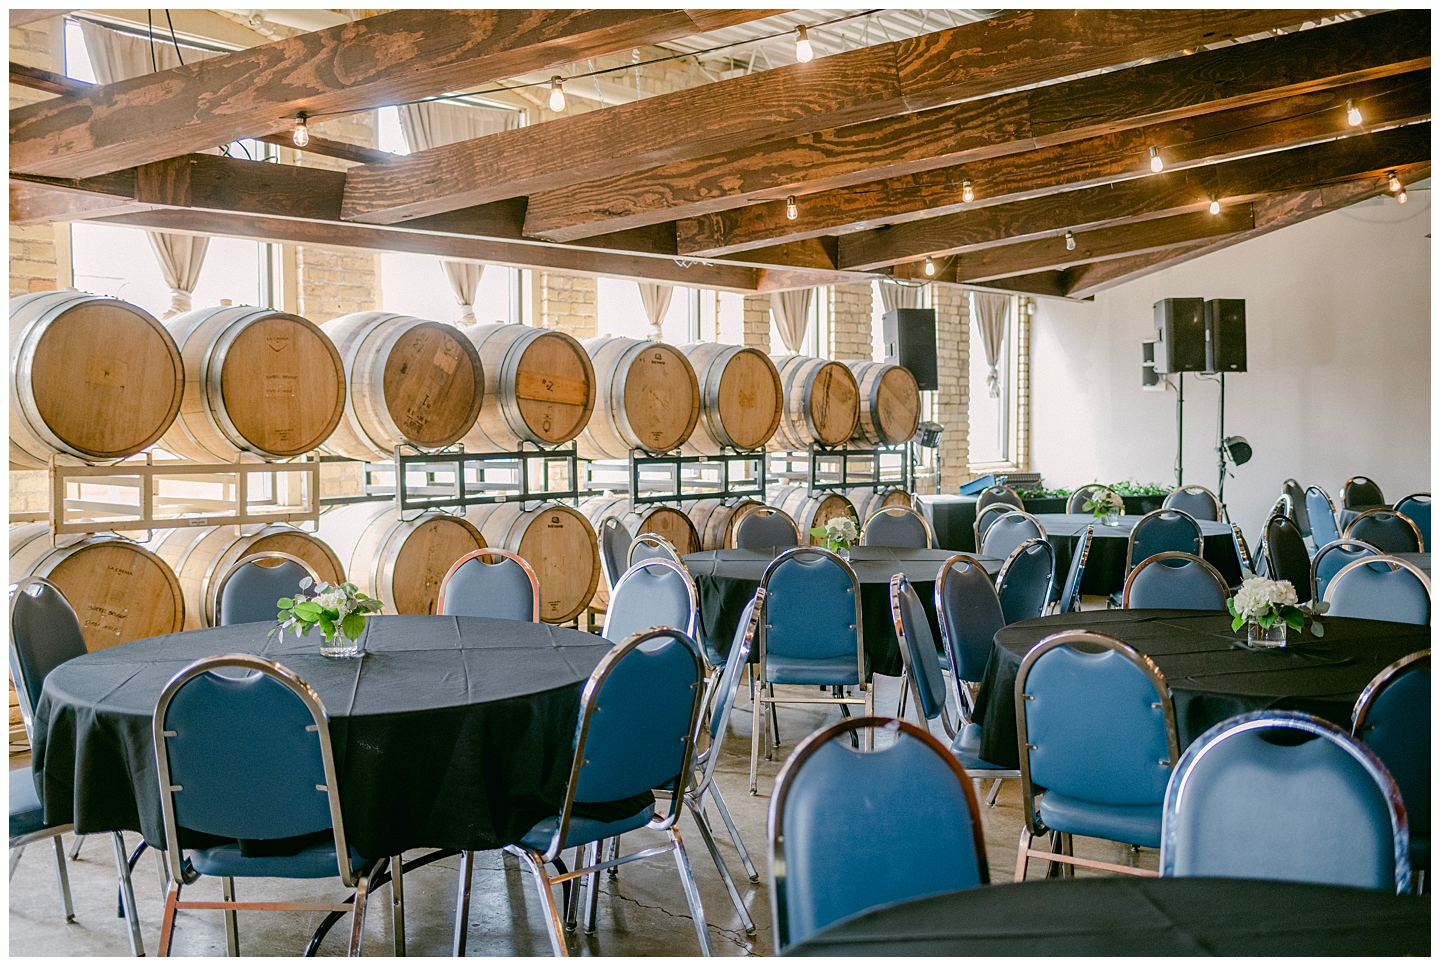 Barrell Room at St. Paul's Urban Growler Brewery set up for a wedding with blue chairs and black tablecloths. Photo by Kayla Lee.